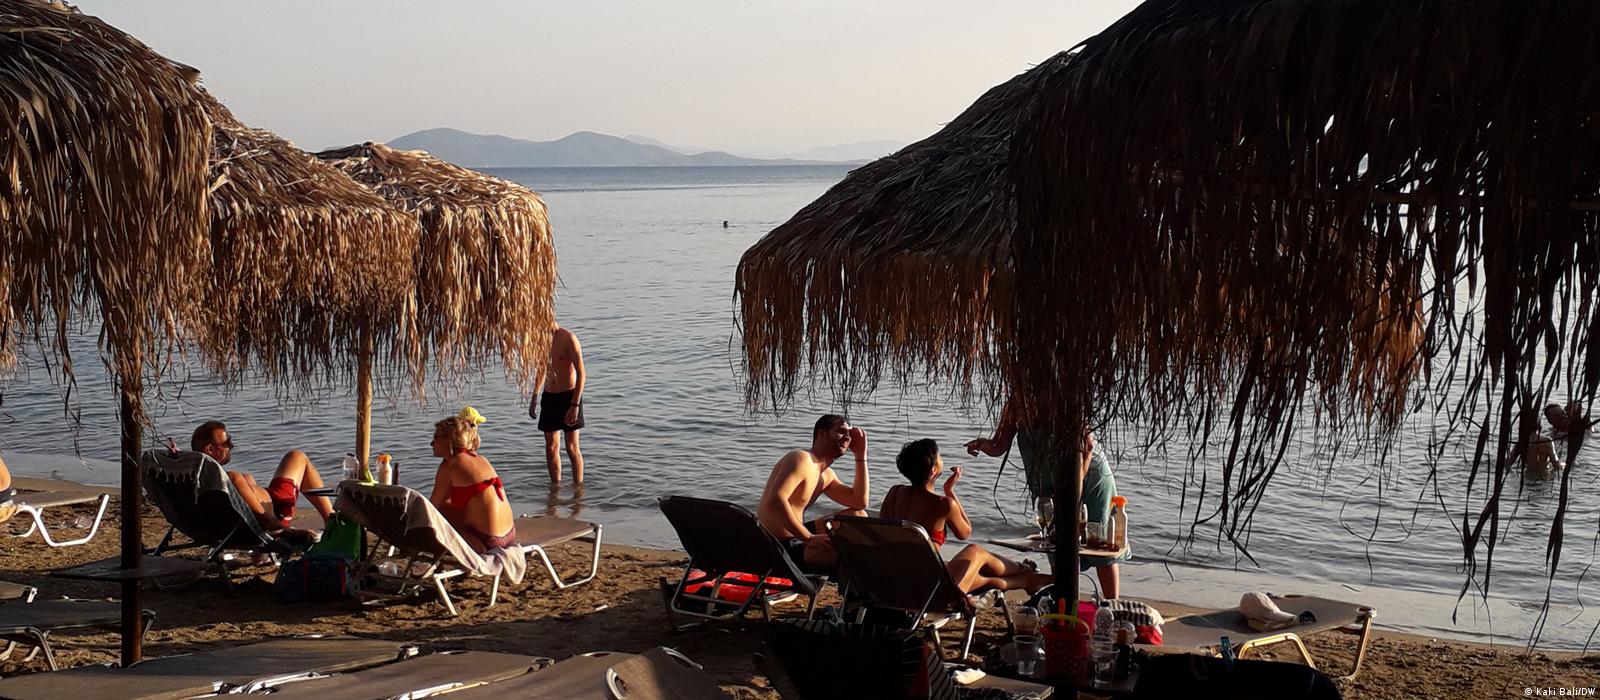 Sustainable tourism practices in Greece